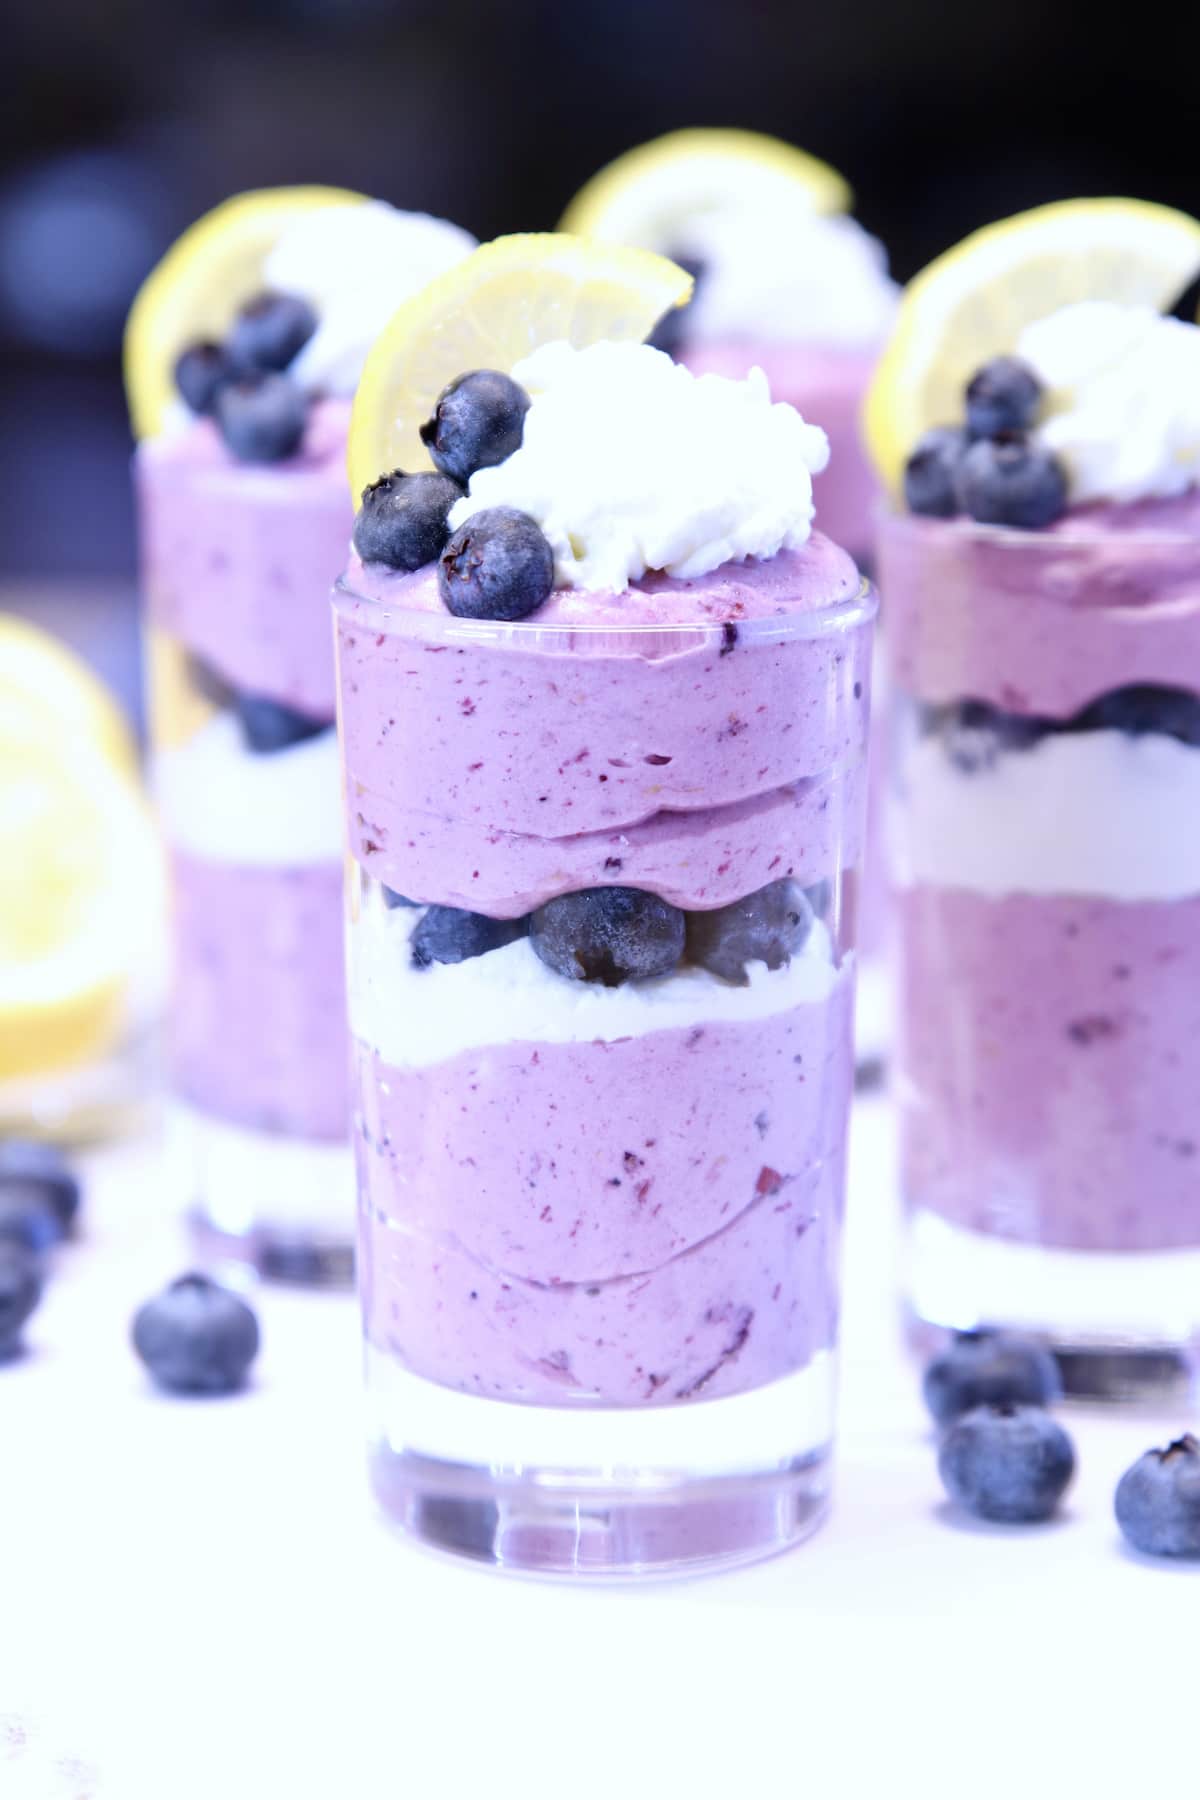 Blueberry Cheesecake - no bake dessert in juice glasses with blueberries and lemon garnish.